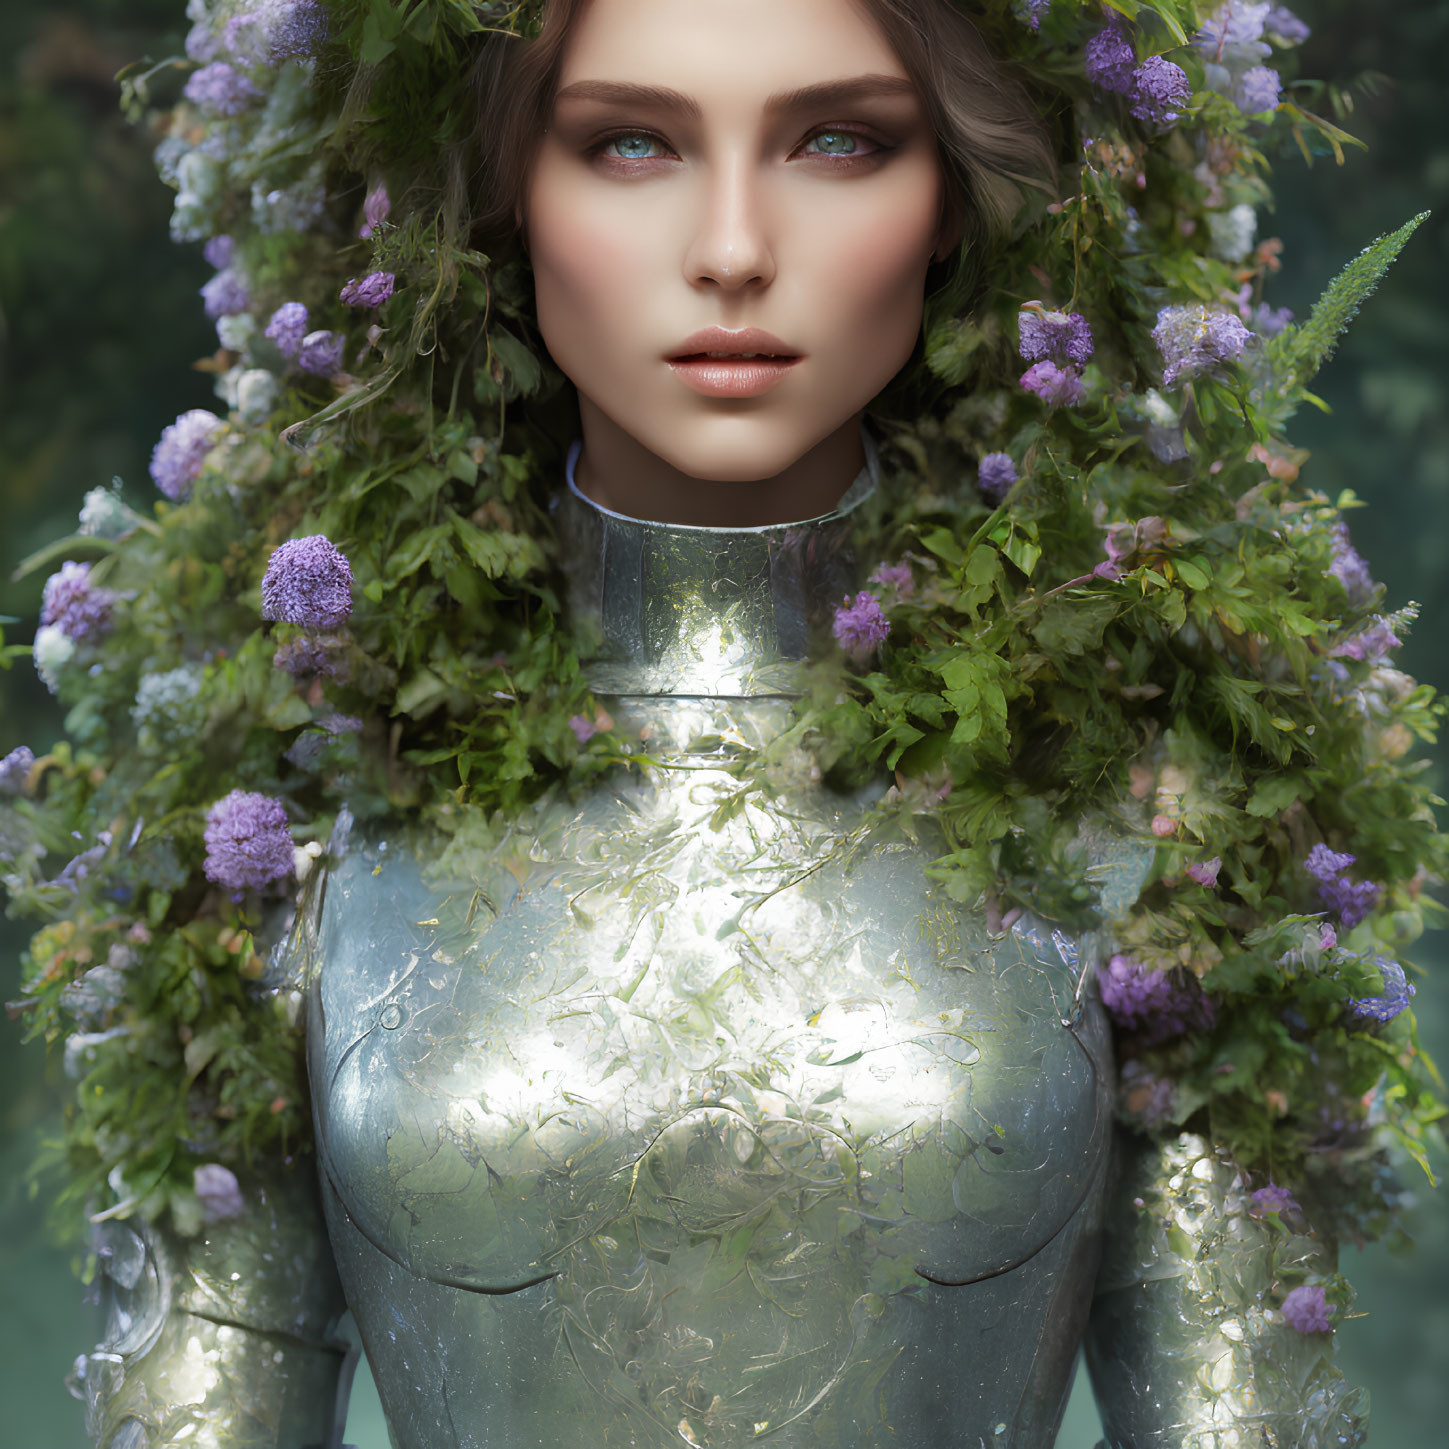 Portrait of person in floral crown and ivy, wearing metallic armor suit against natural background